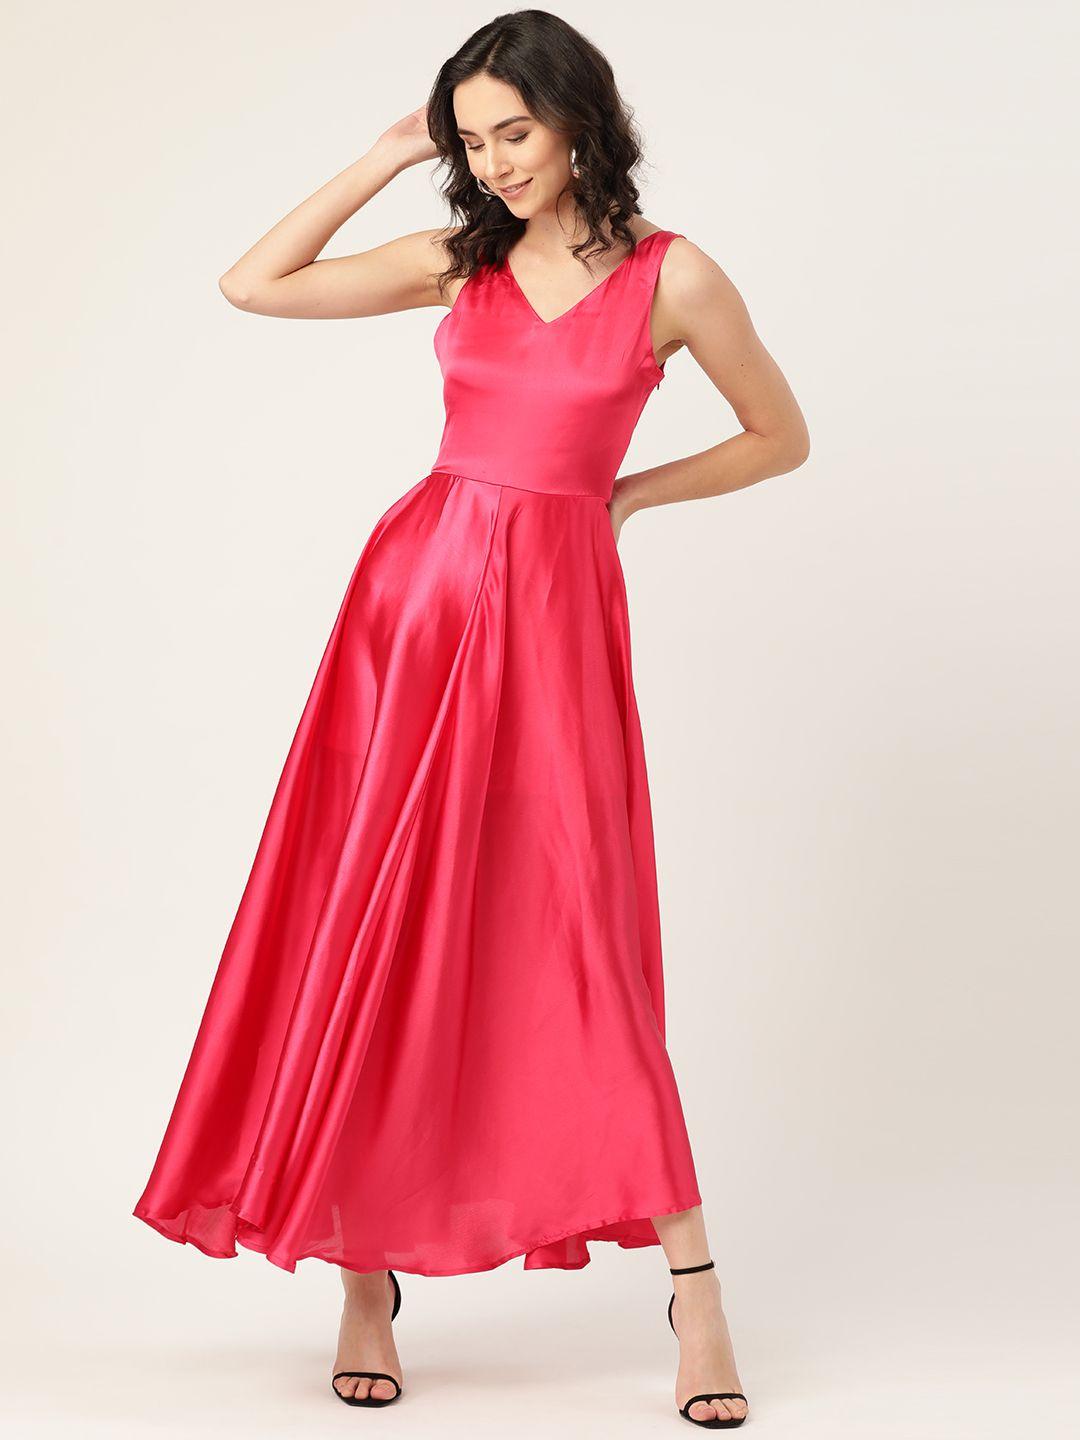 dodo & moa pink solid satin finish a-line dress